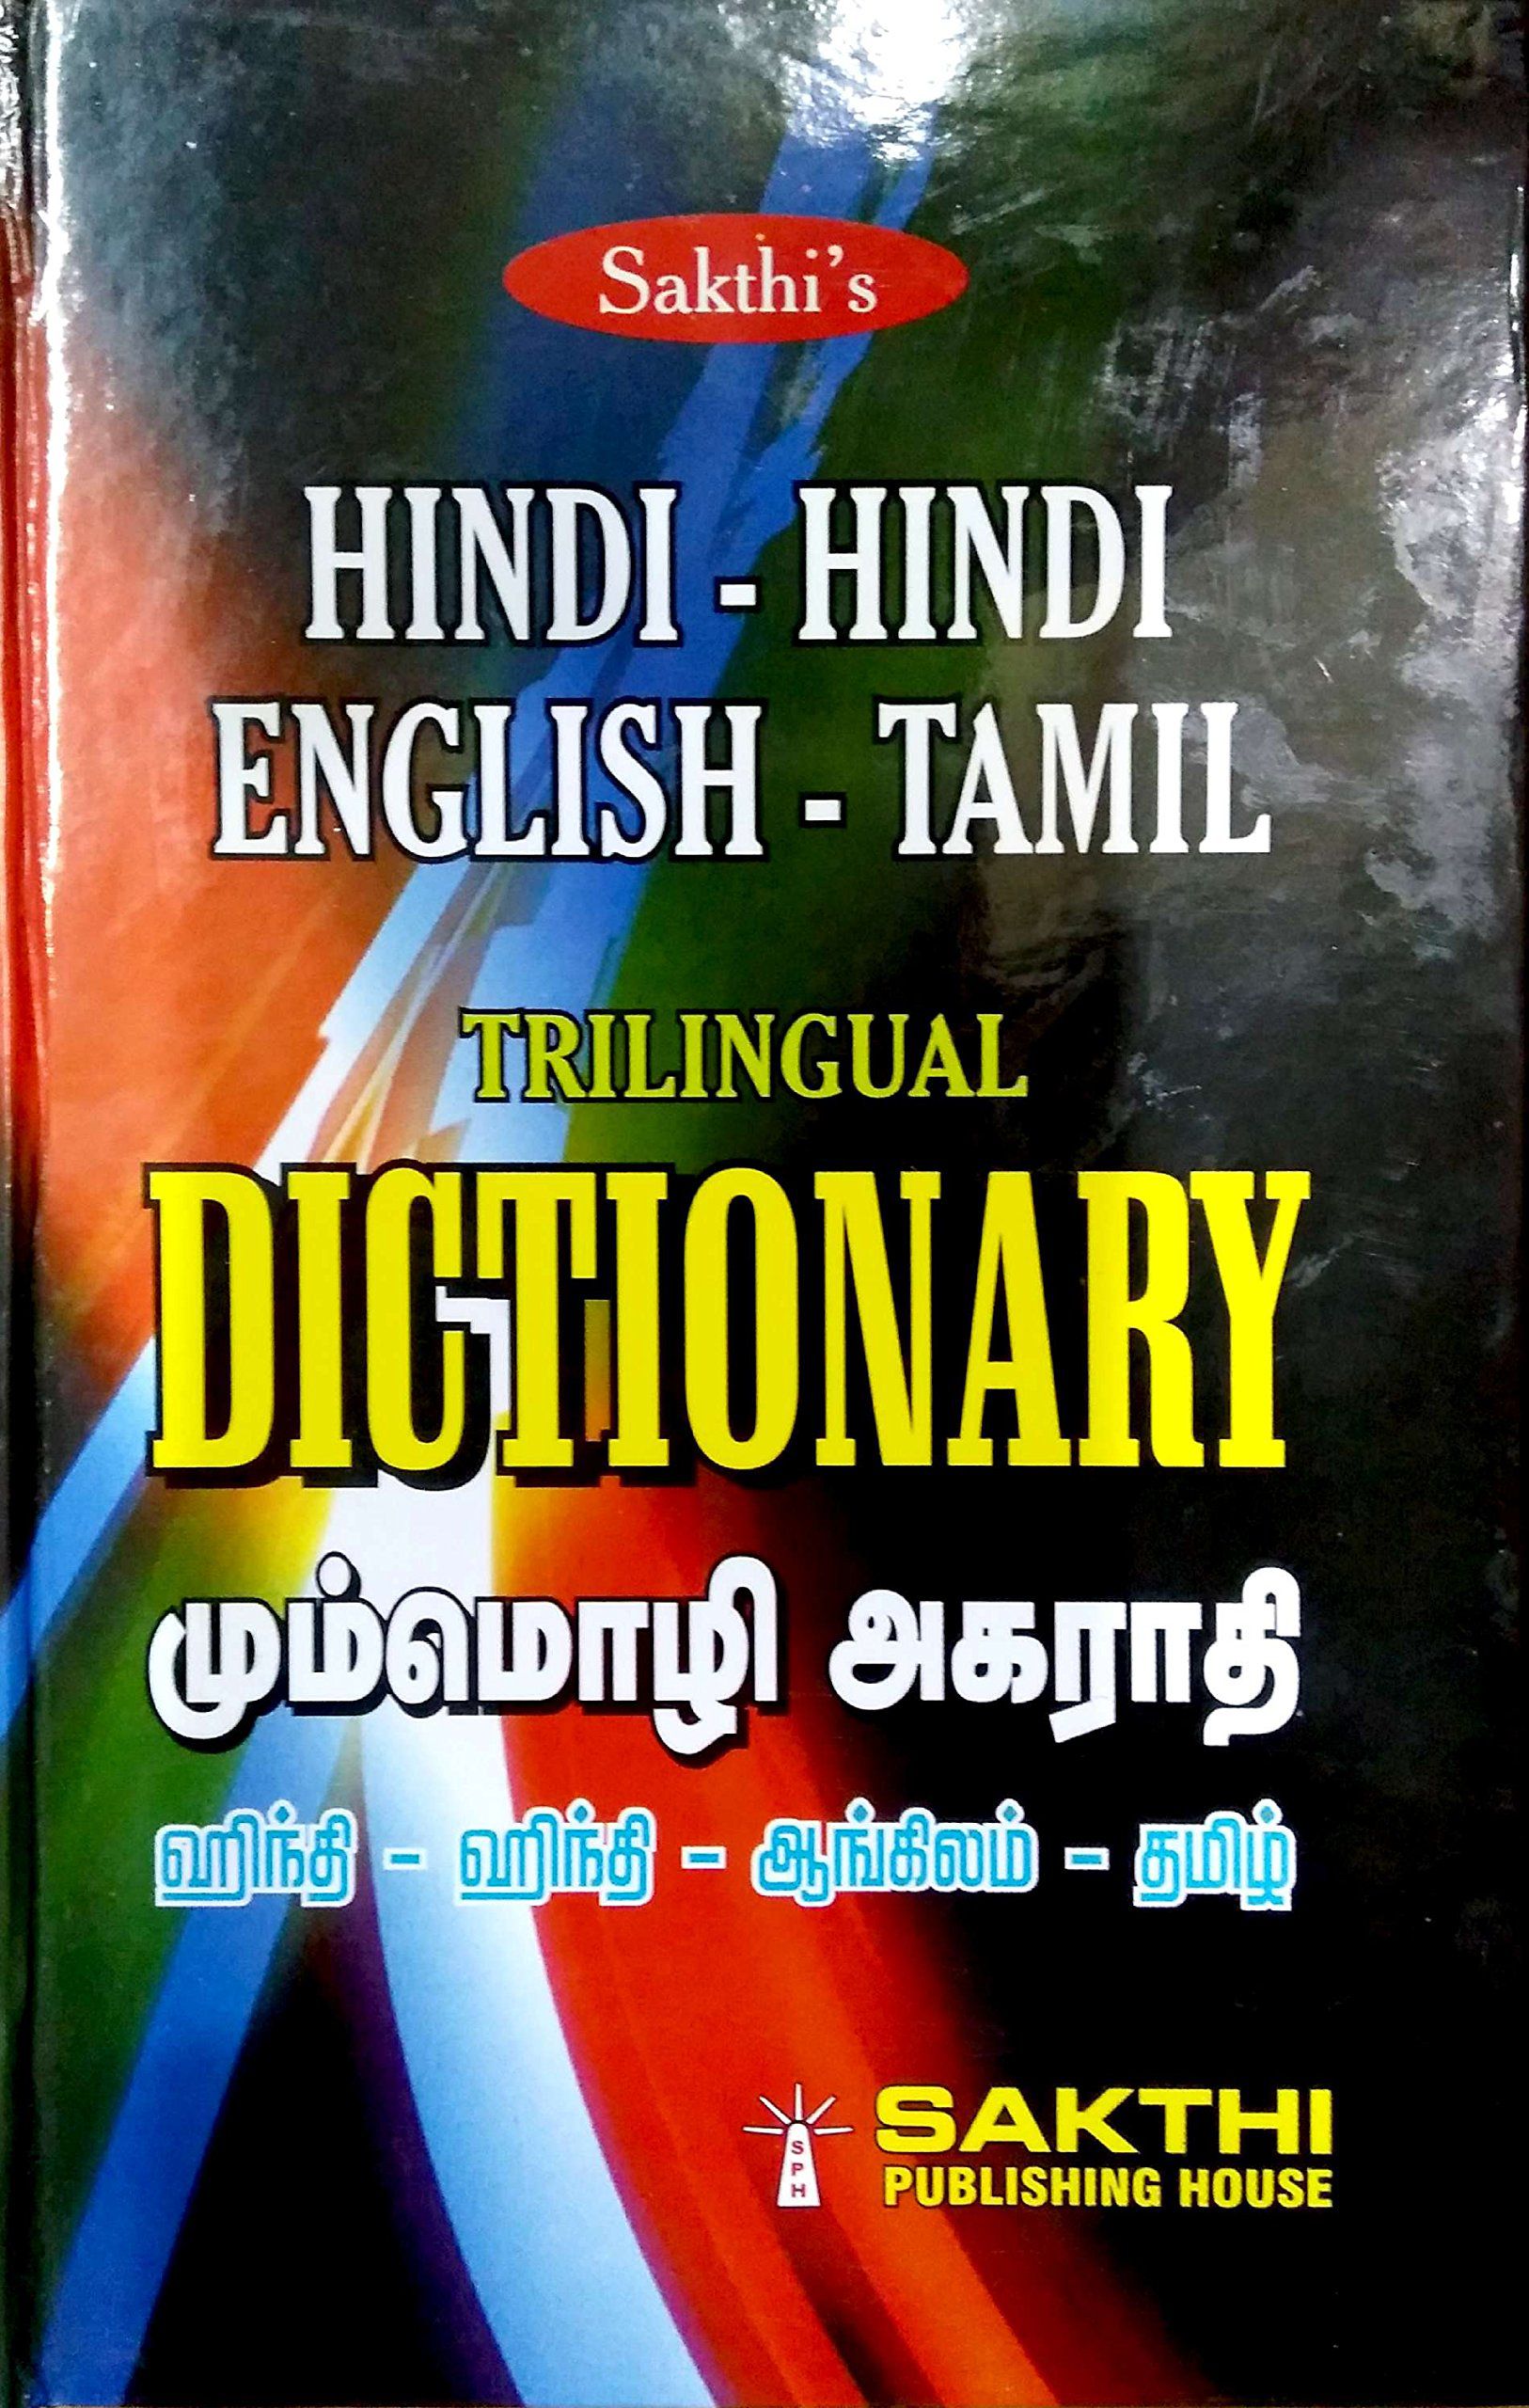 Hindi Hindi English Tamil Trilingual Dictionary Buy Hindi Hindi English Tamil Trilingual Dictionary Online At Low Price In India On Snapdeal